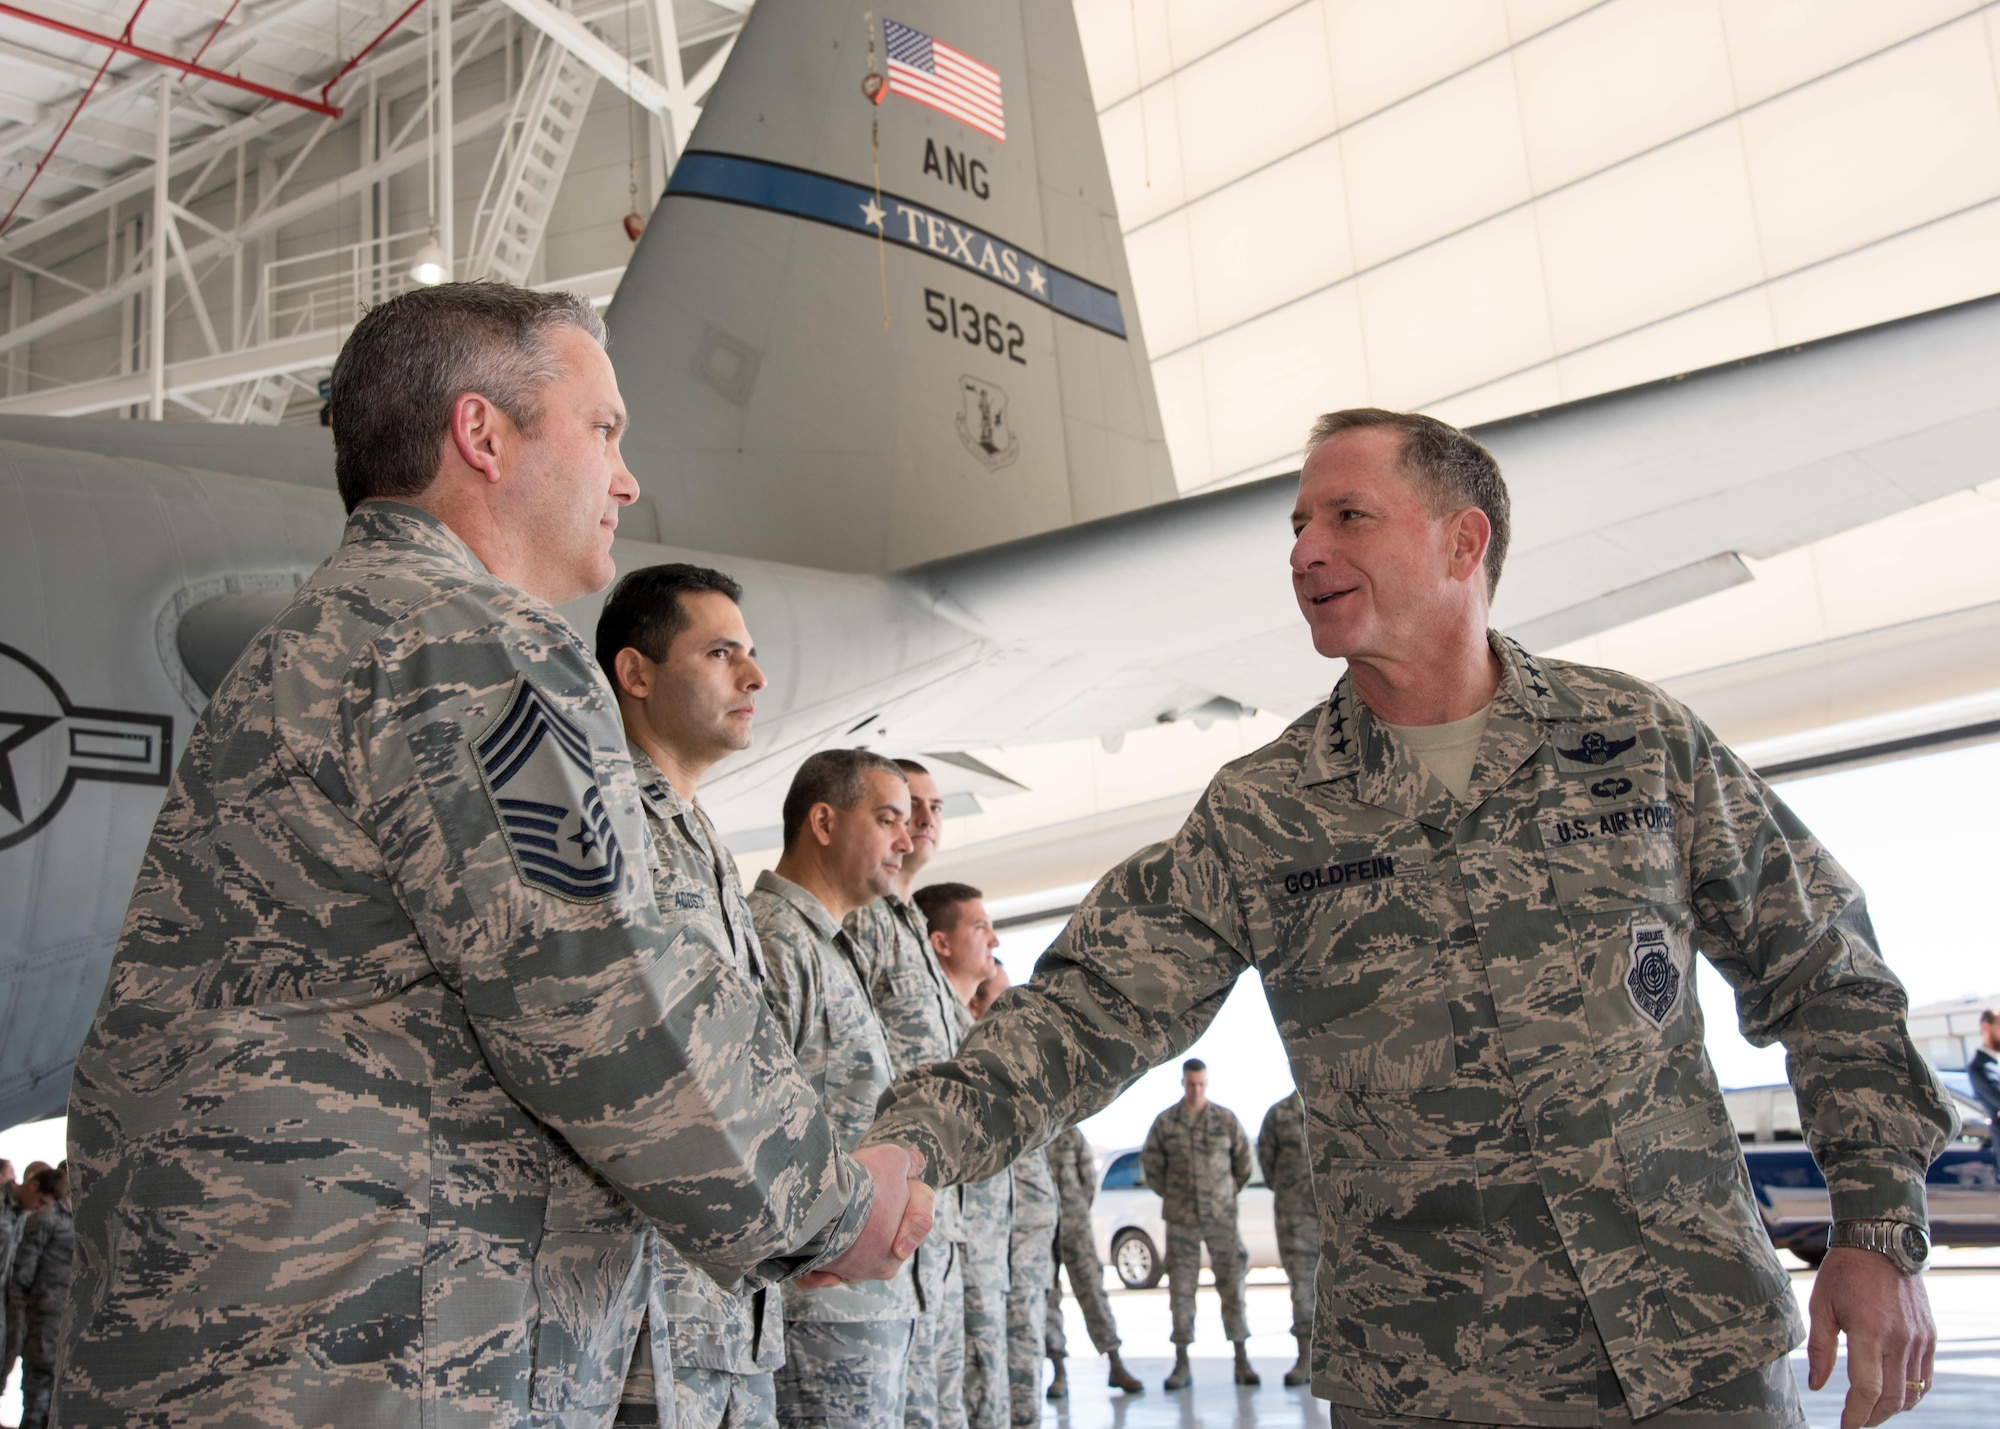 Air Force Chief of Staff Gen. David L. Goldfein coins Chief Master Sgt. Huey McKinney, 136th Airlift Wing, Texas Air National Guard aircraft maintenance superintendent, during a visit to Naval Air Station Fort Worth Joint Reserve Base, Texas, Jan. 29, 2017. McKinney was coined for his work with the Inspector General program during the past year. (Air National Guard photo by Senior Master Sgt. Elizabeth Gilbert)